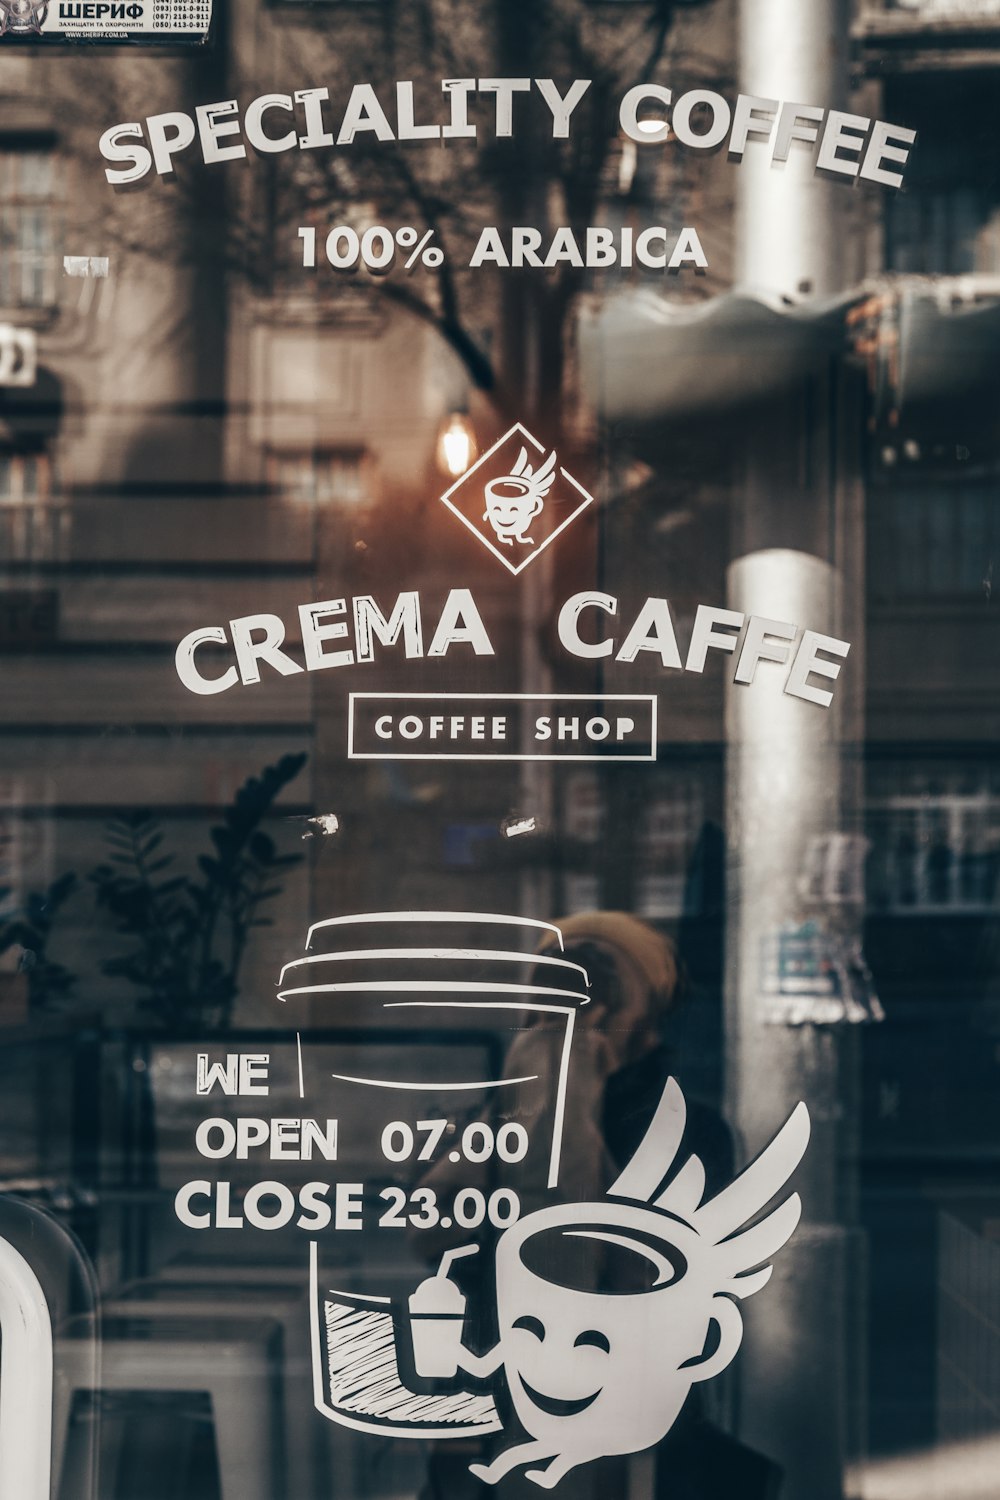 Speciality Coffee text on glass panel